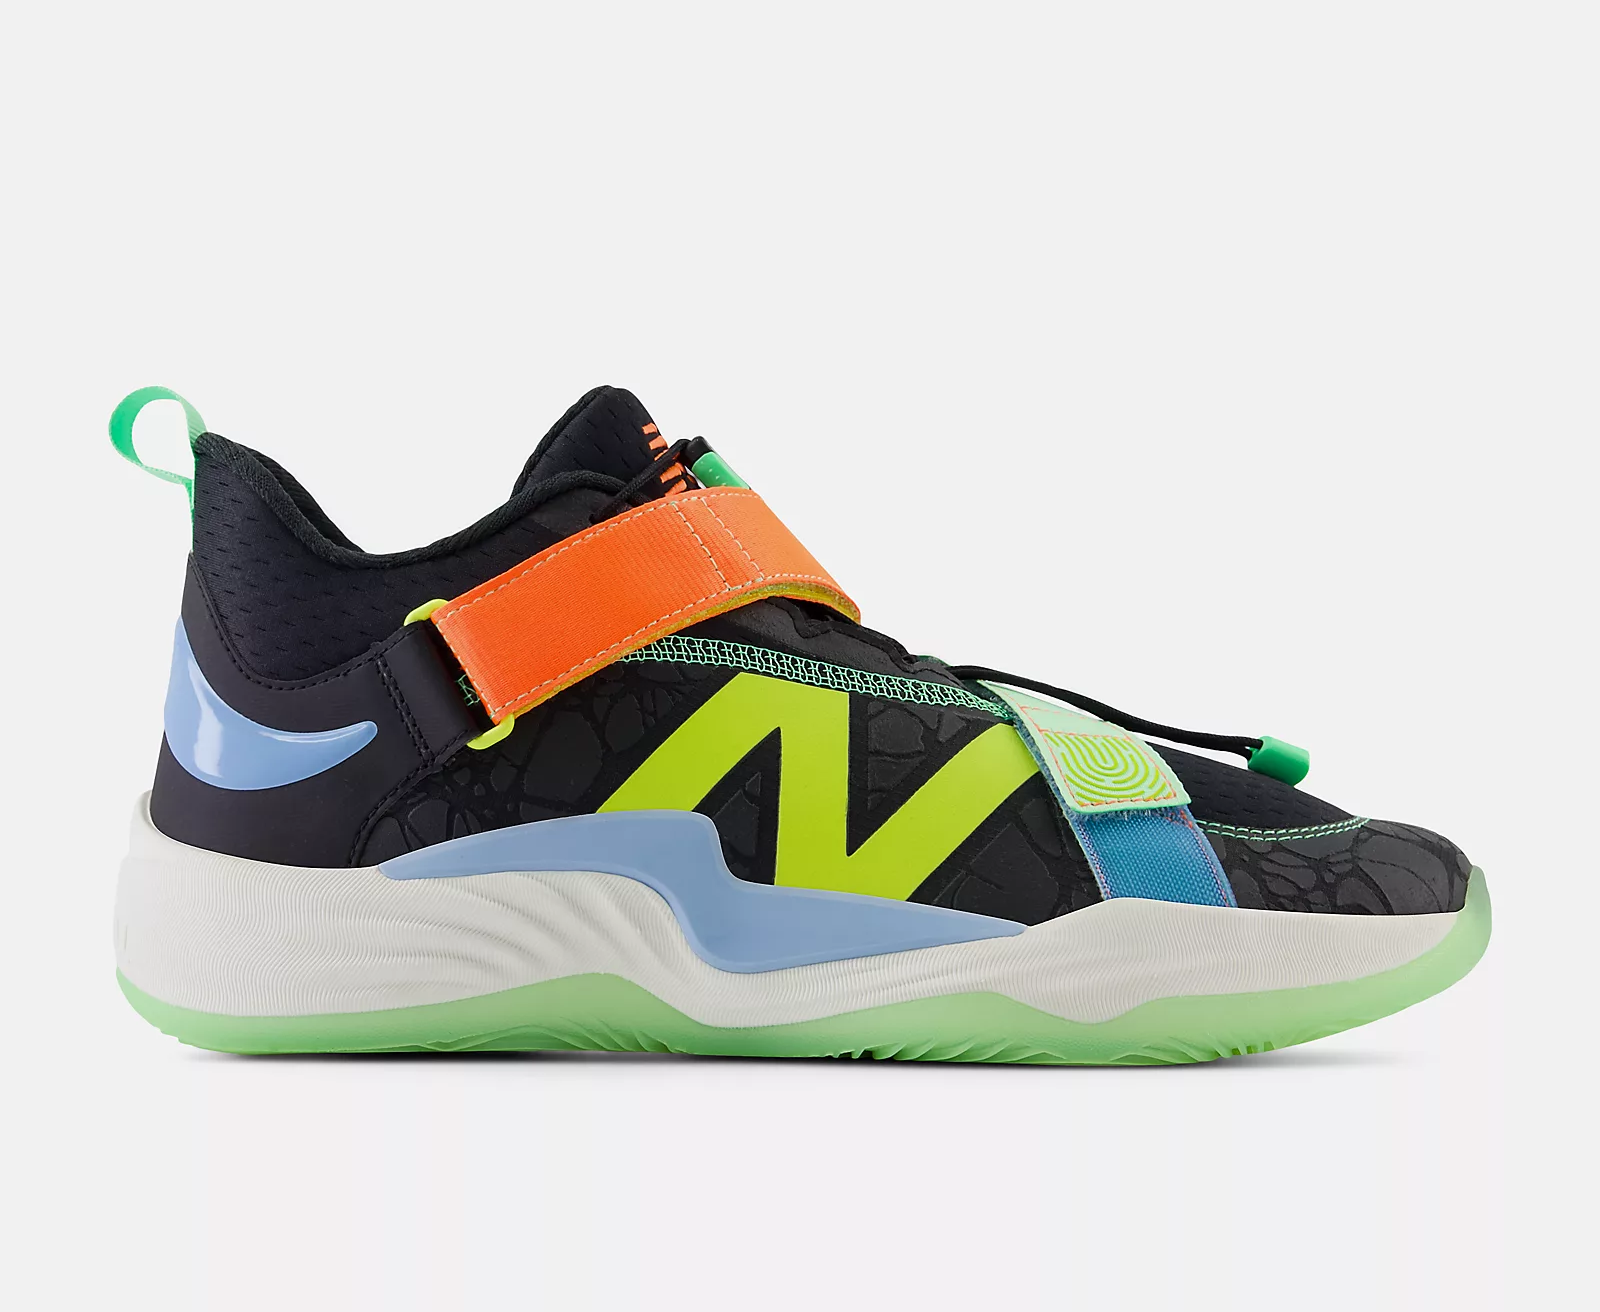 New Balance FuelCell Lindor 2 Pre-Game turf